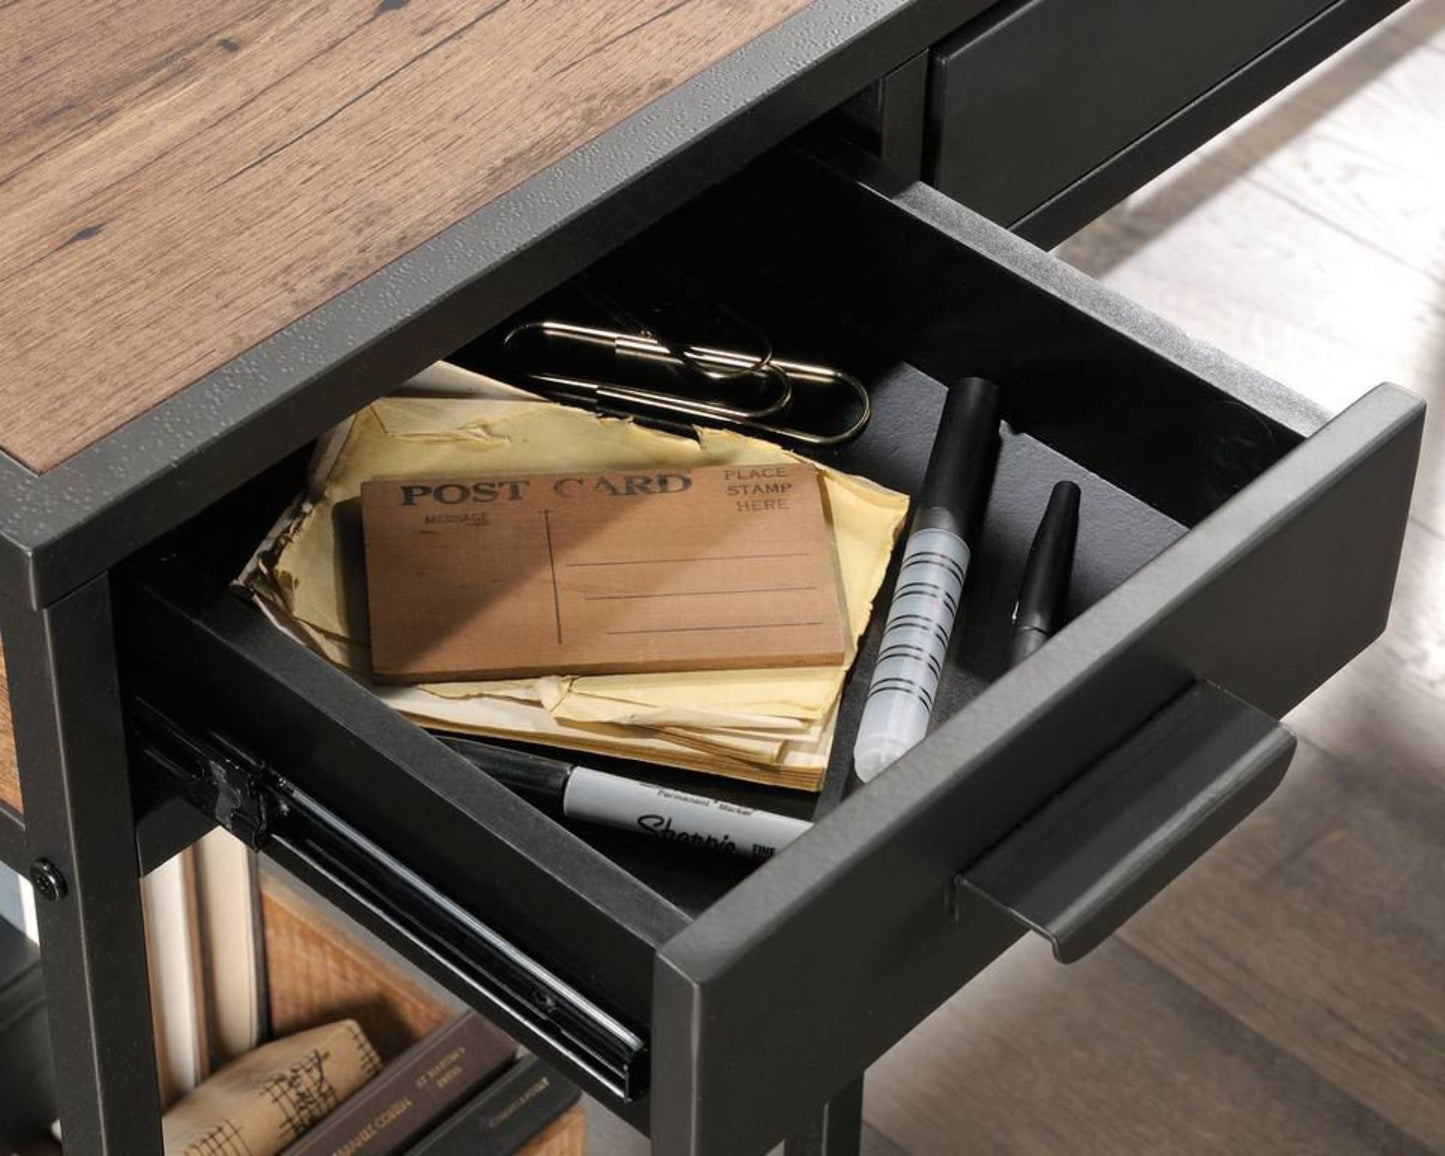 Contemporary Industrial Style home office L-shaped desk in Oak finish and modern black accents